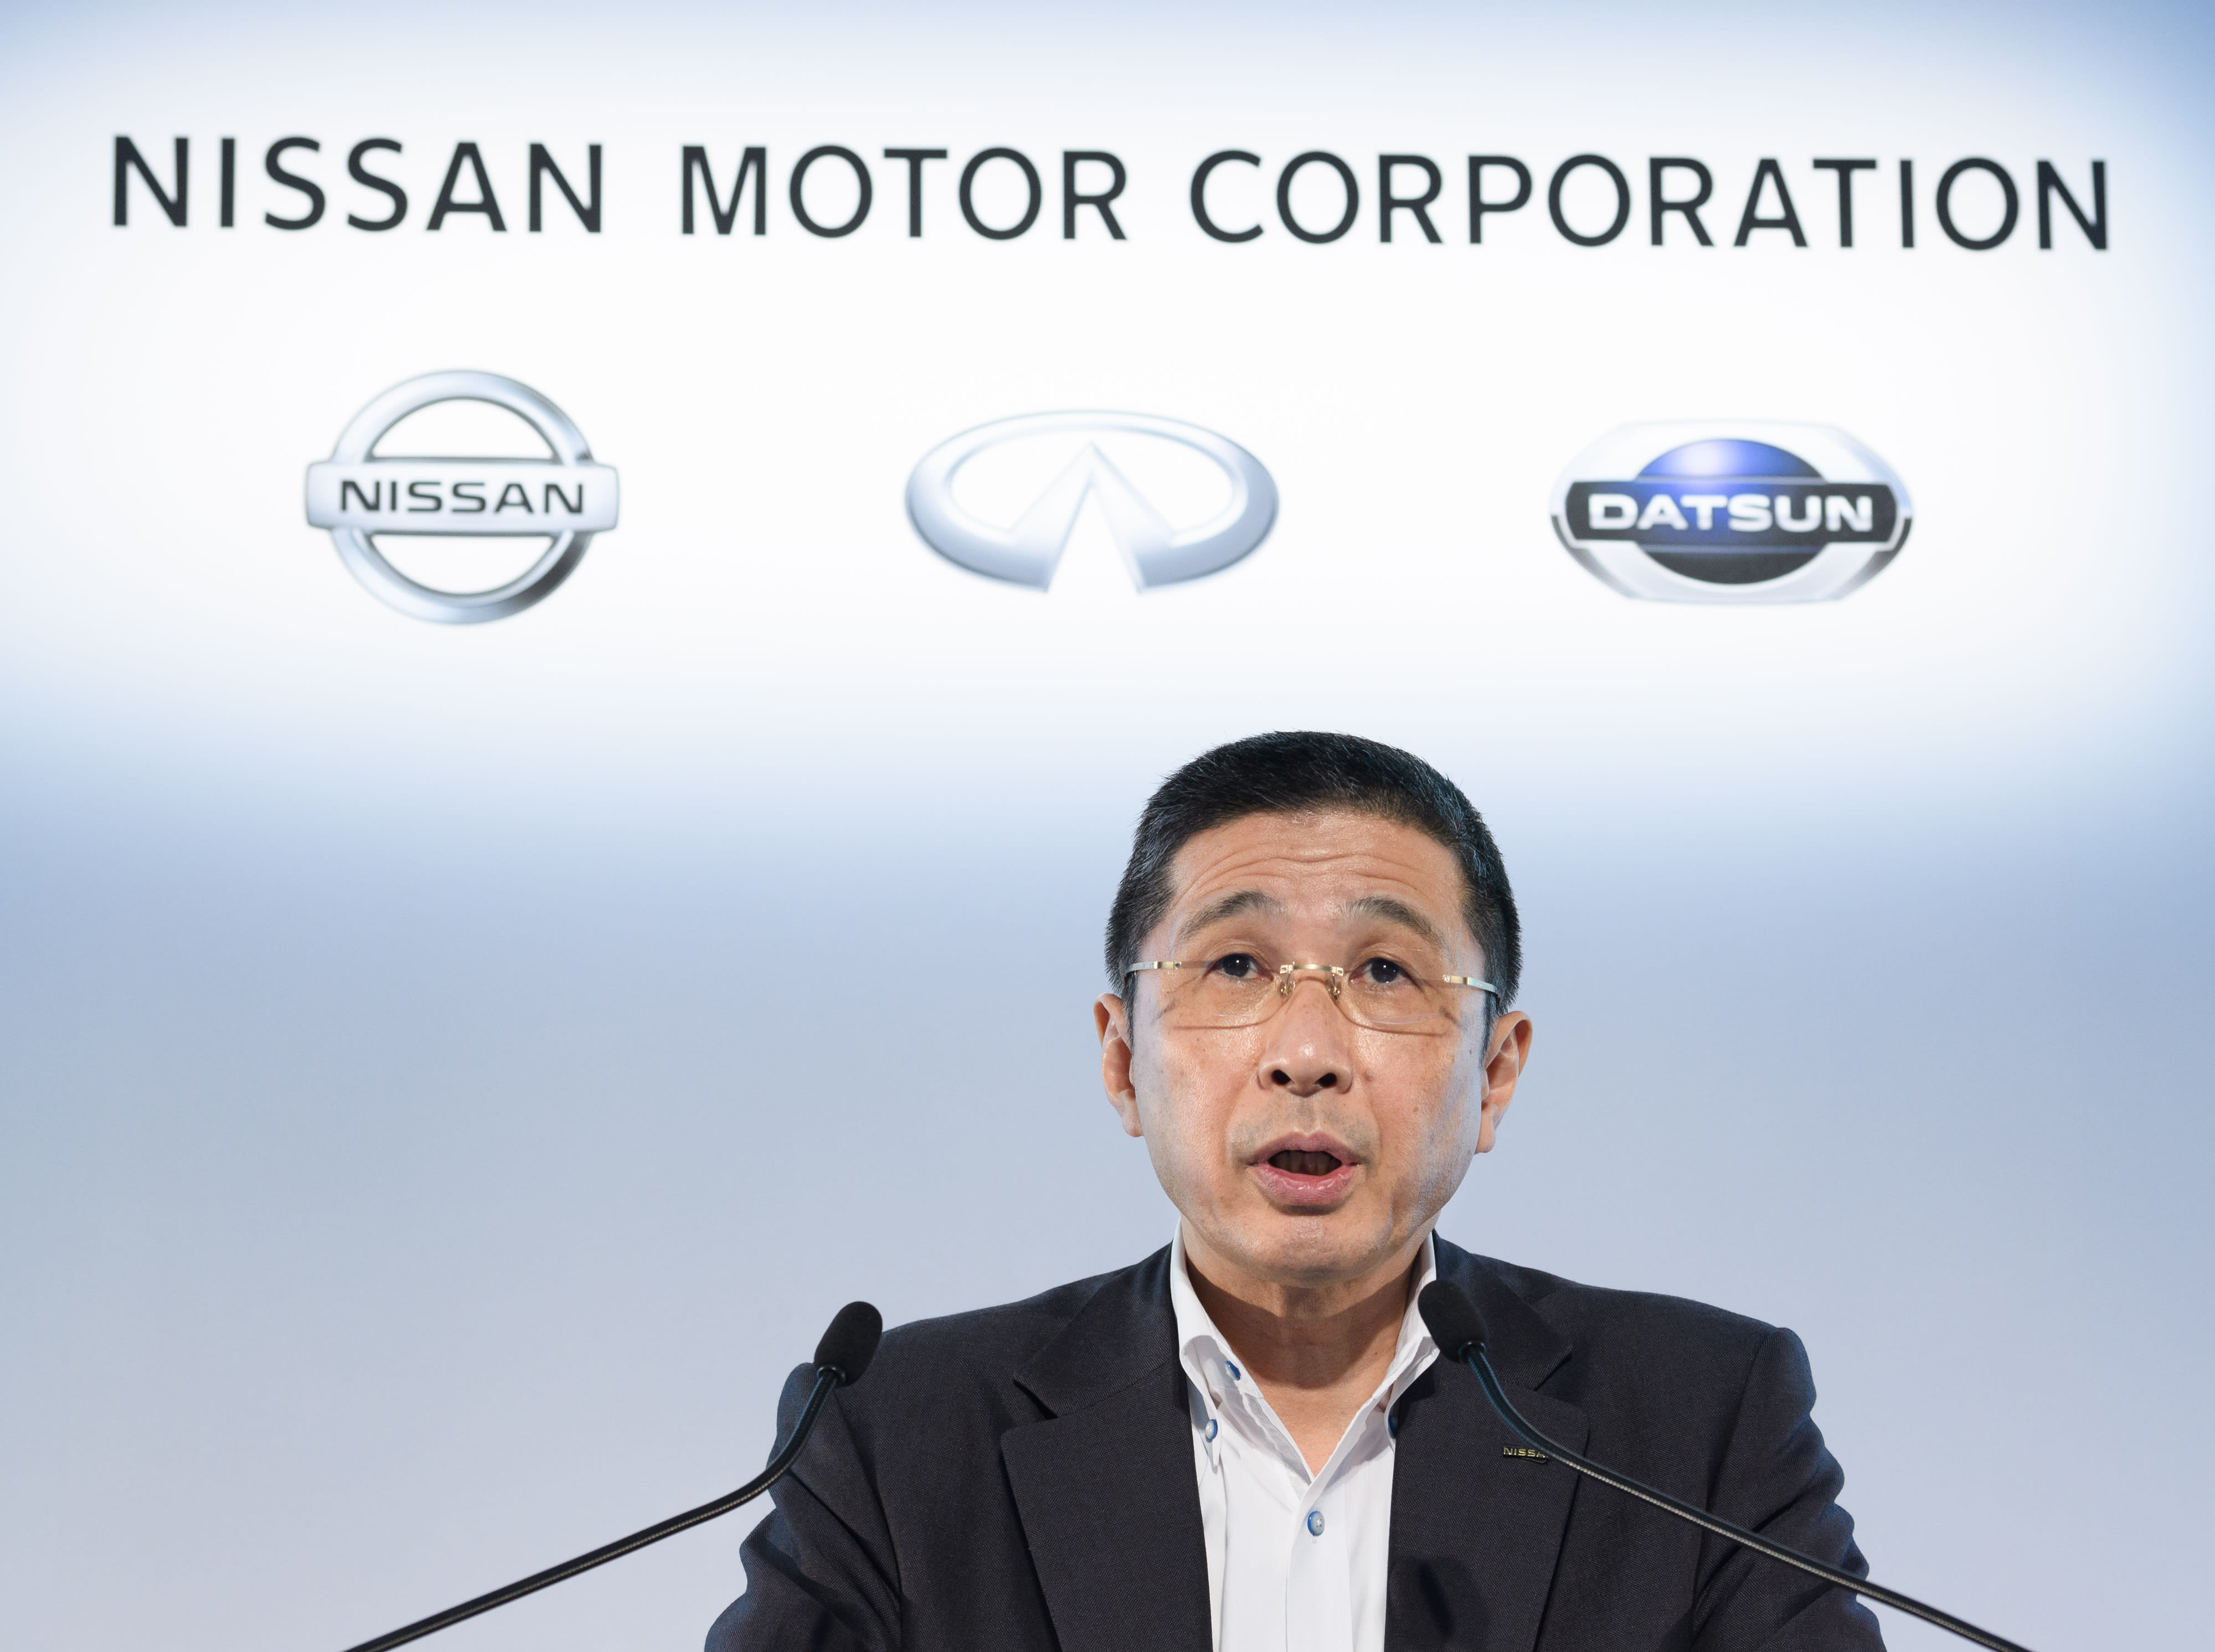 Nissan's CEO exit complicates turnaround efforts as corruption scandal spreads